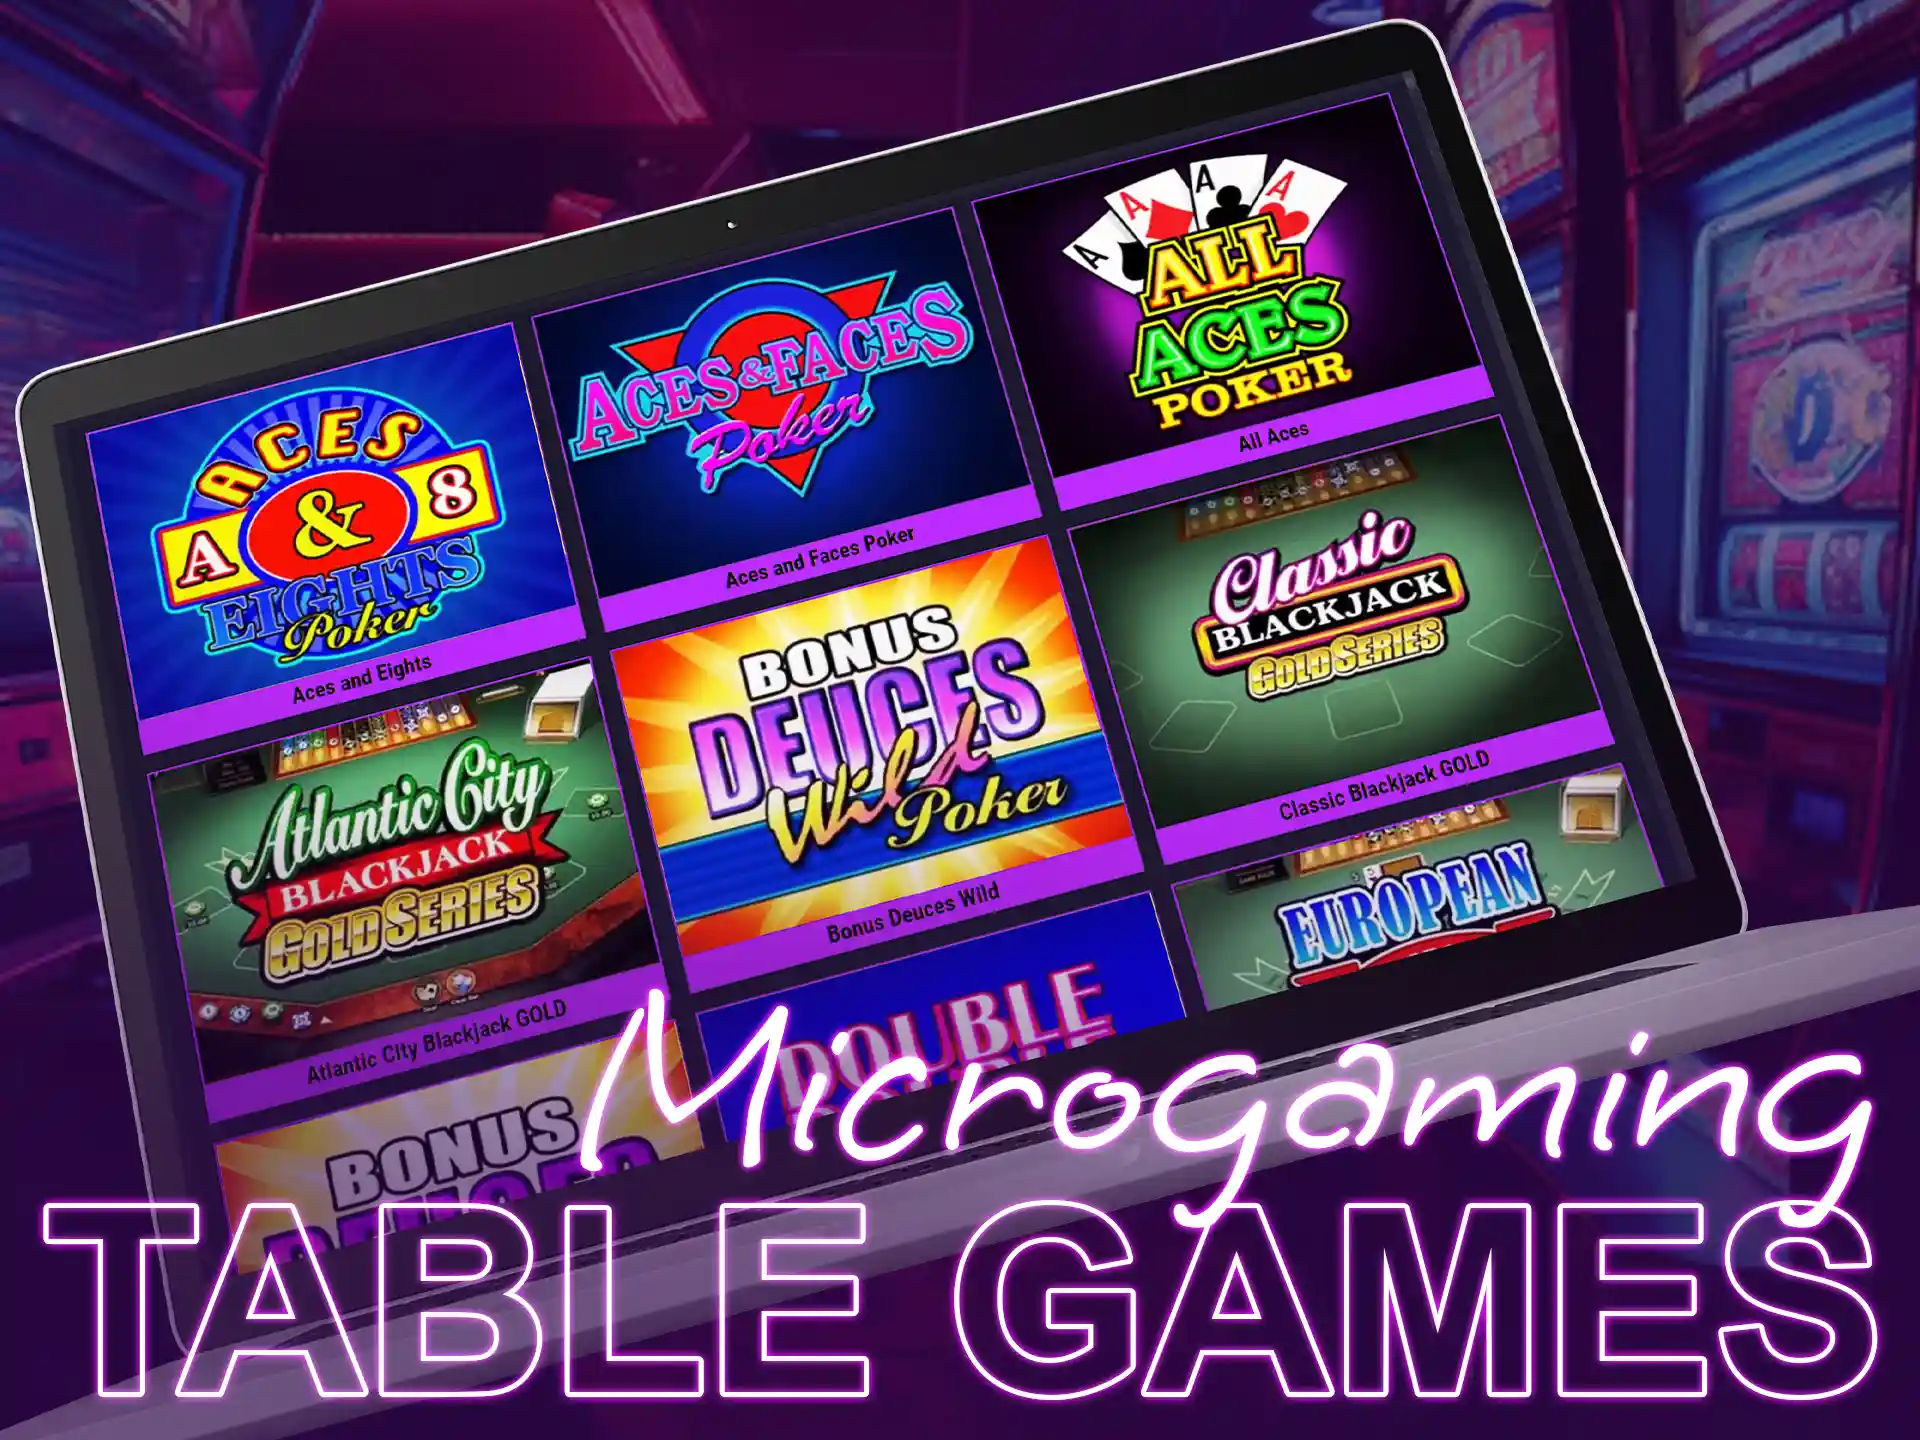 Play your favorite card games with Microgaming.